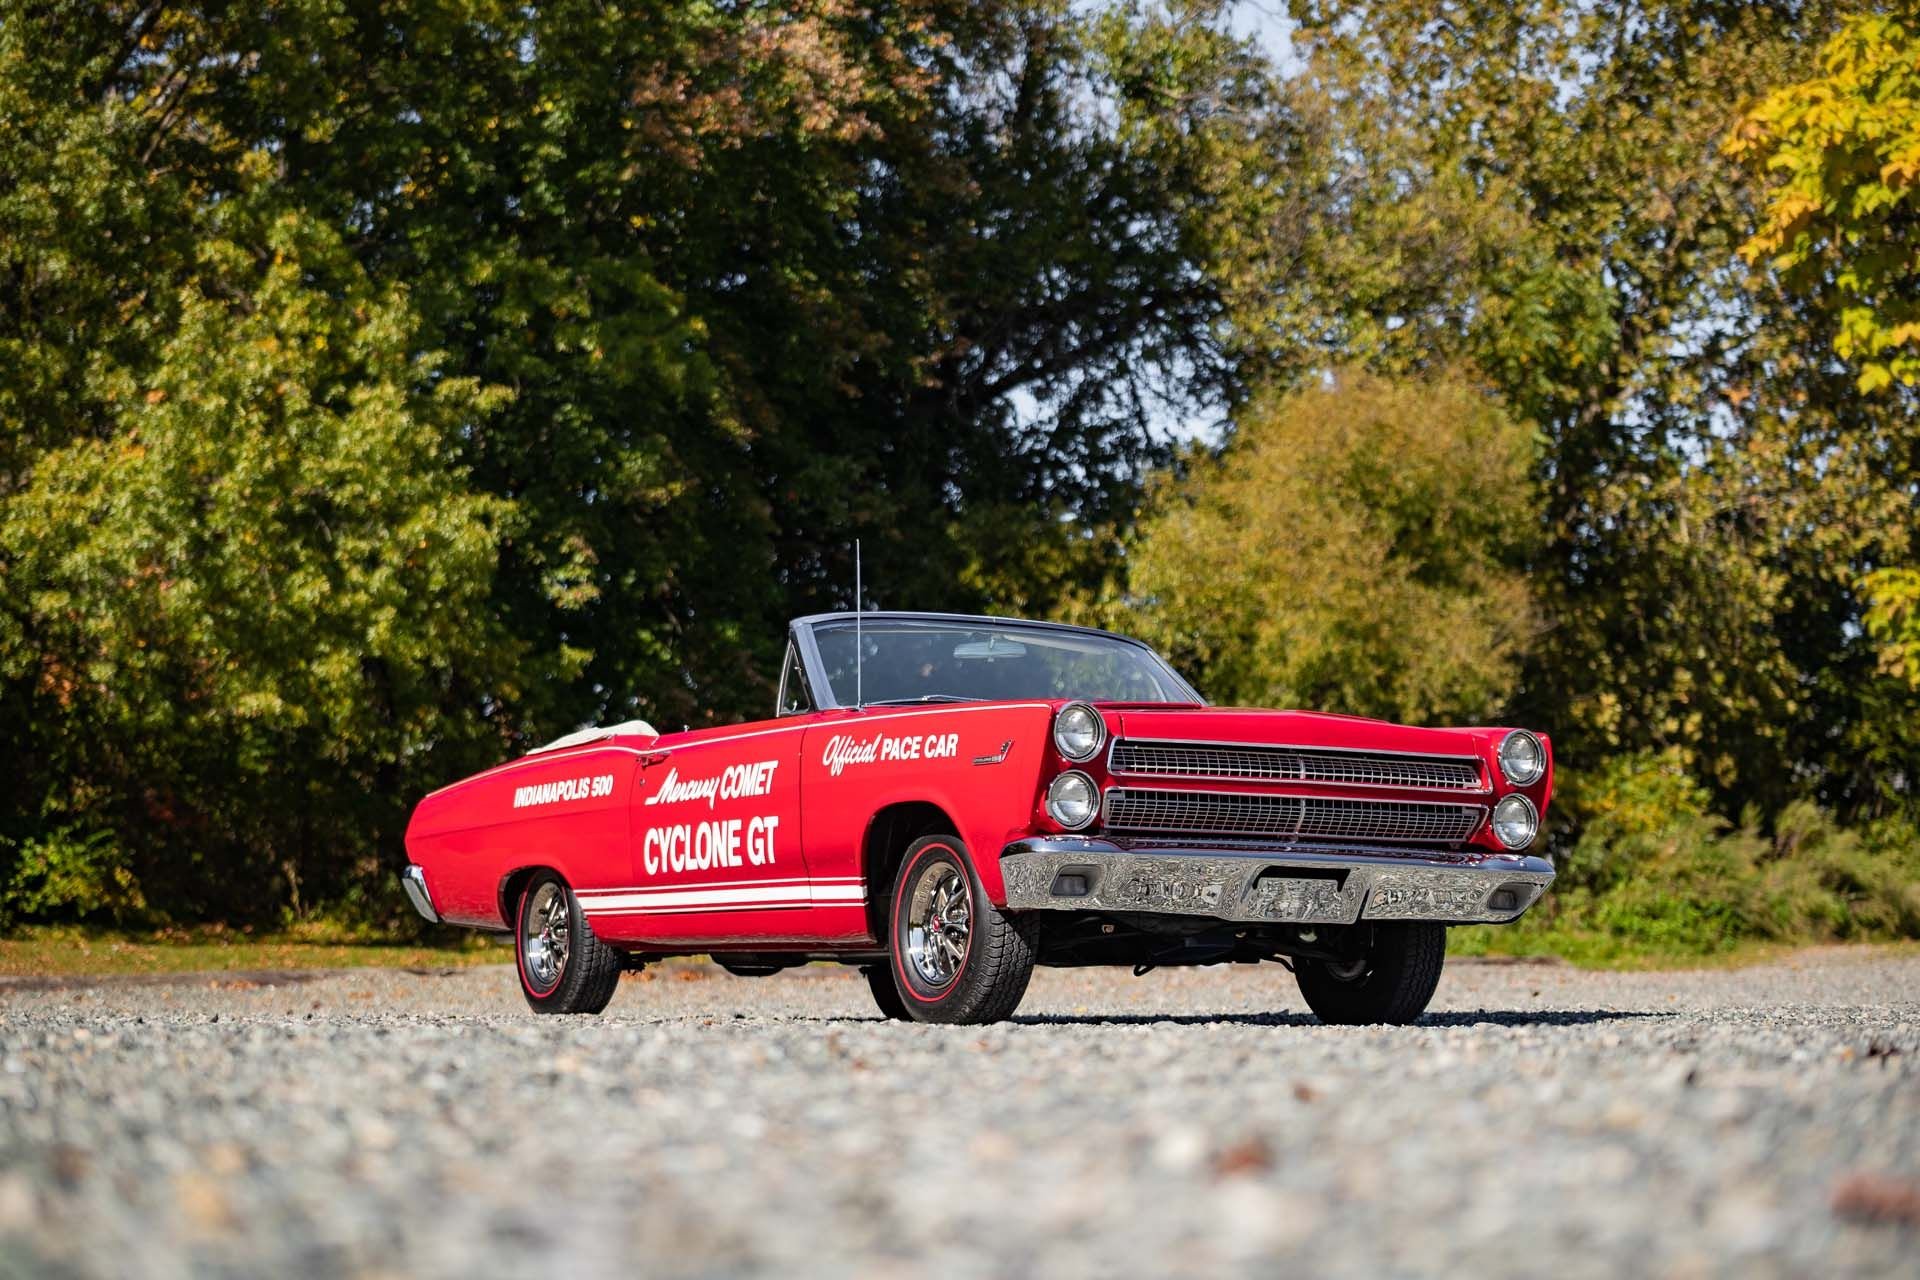 Broad Arrow Auctions | 1966 Mercury Comet Cyclone GT Pace Car Convertible